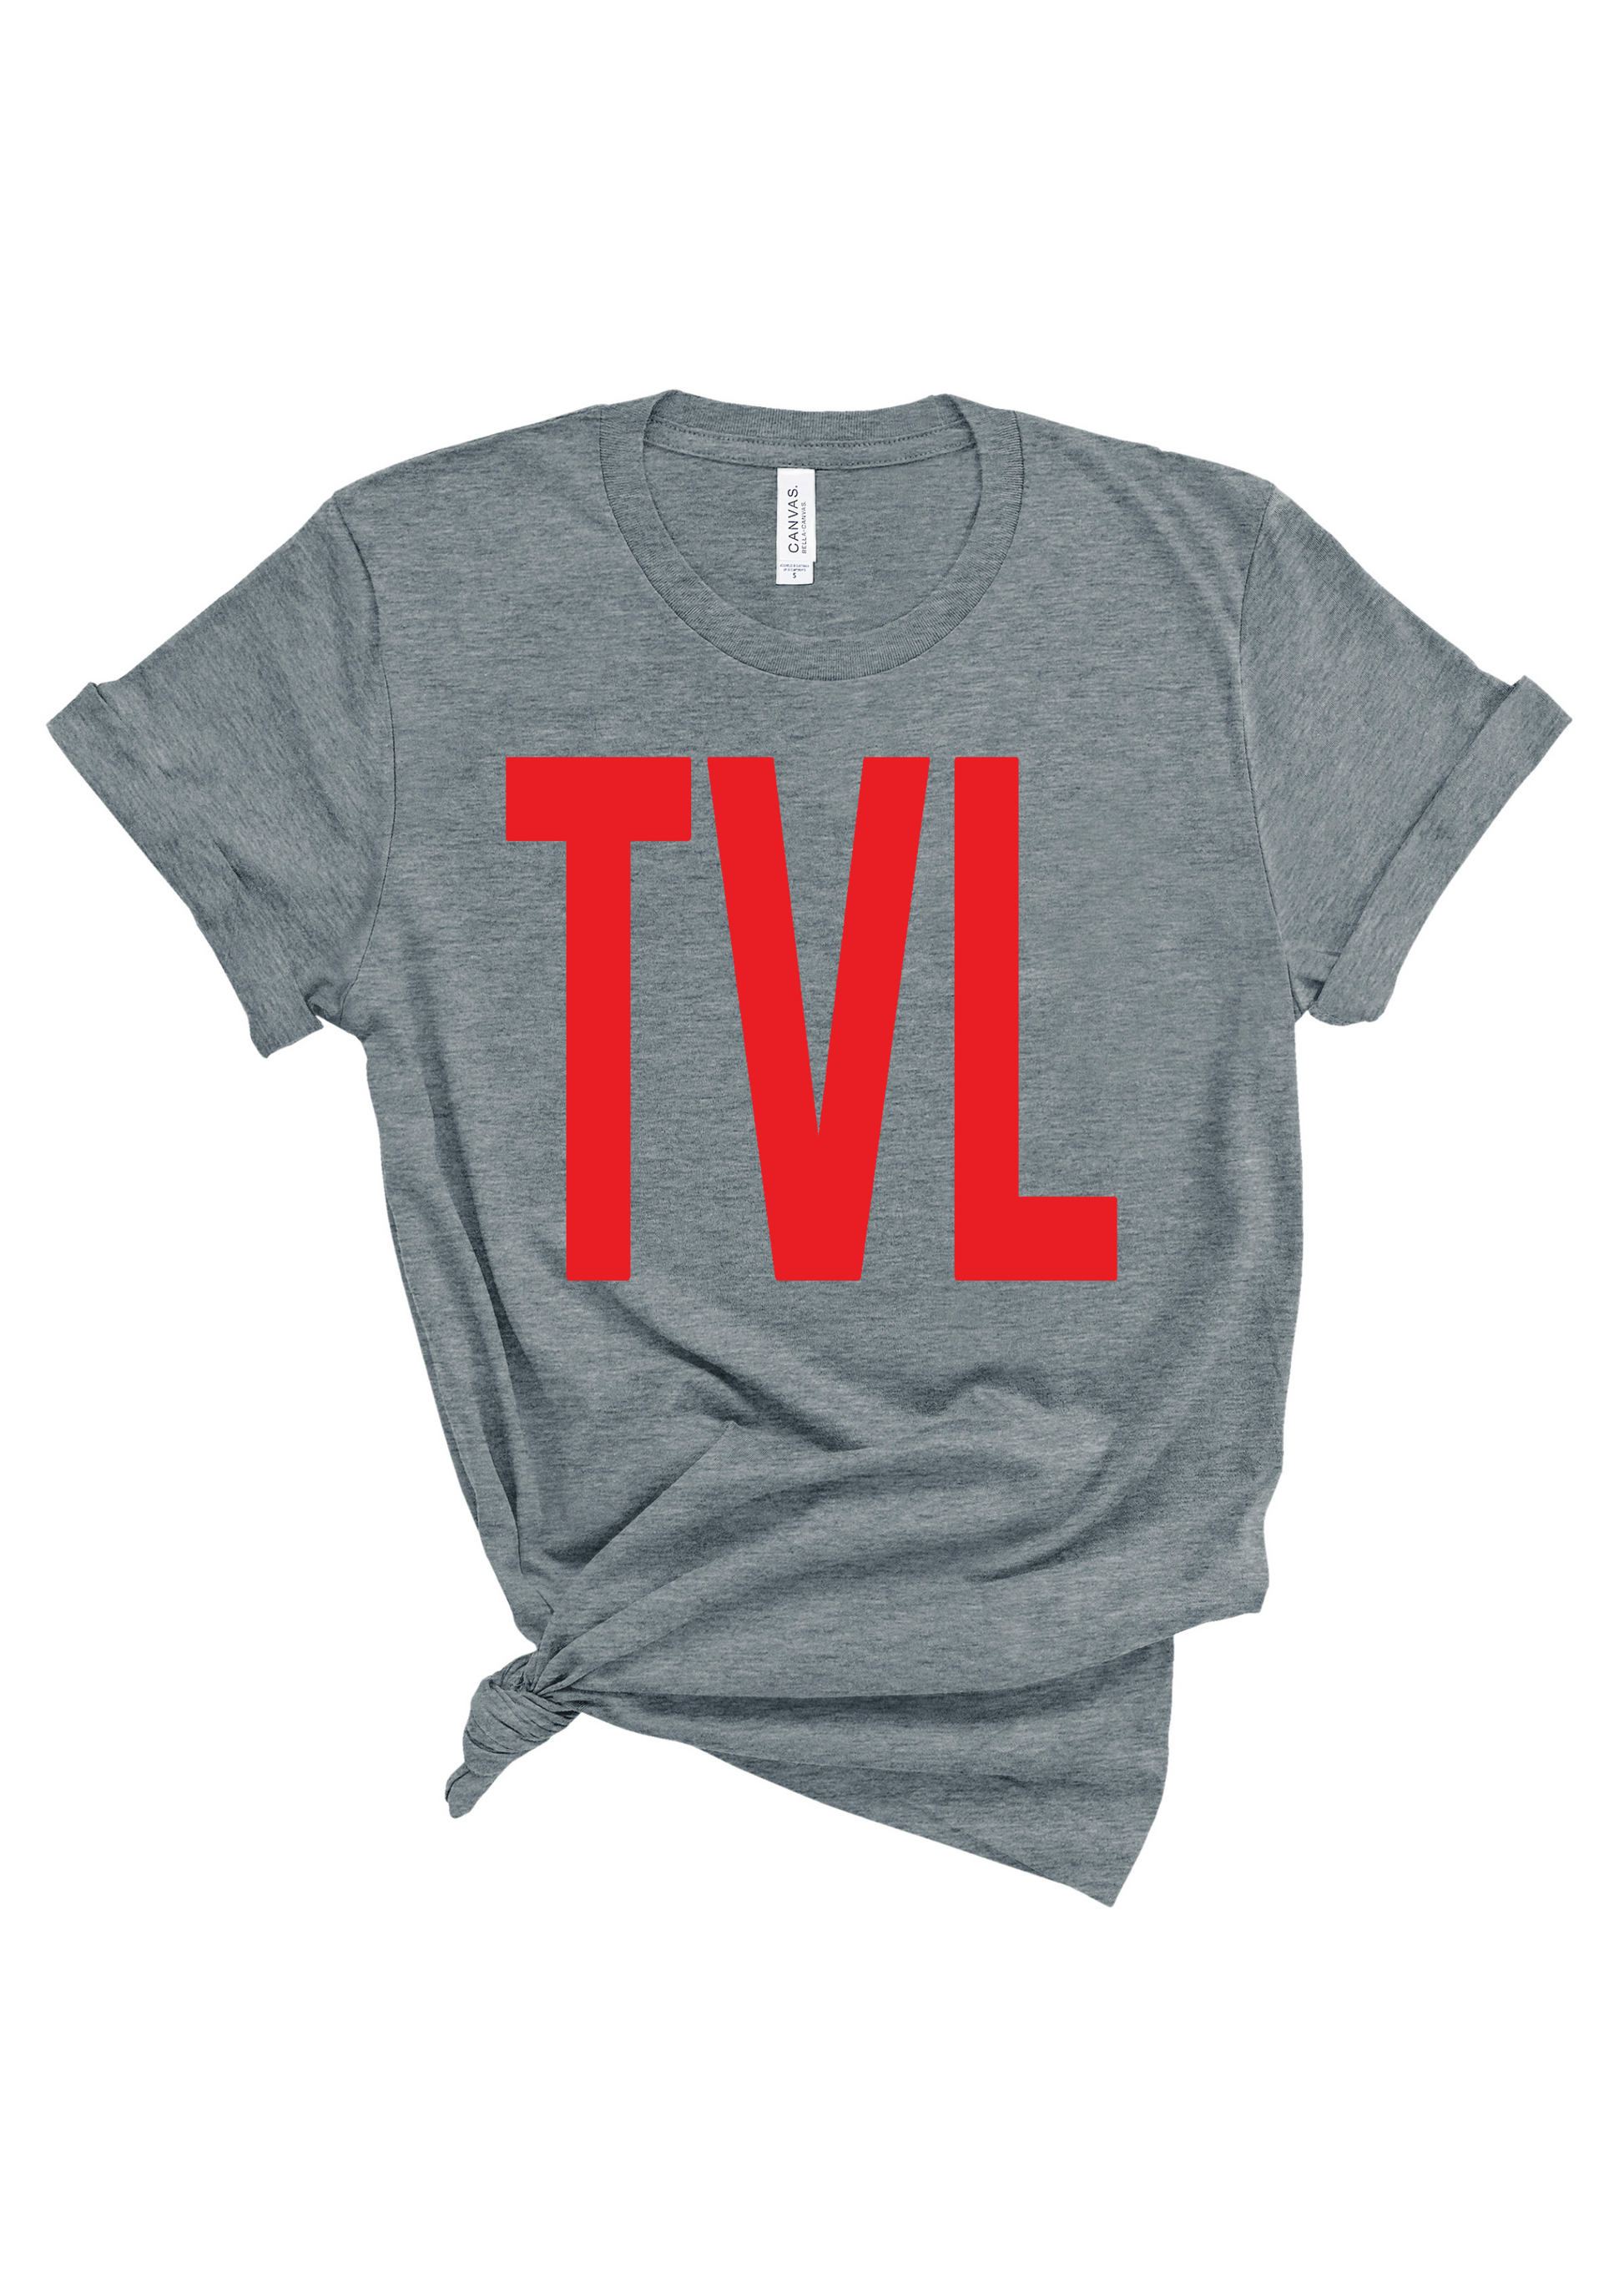 TVL | Adult Tee-Adult Pullover-Shirt Shop-Sister Shirts, Cute & Custom Tees for Mama & Littles in Trussville, Alabama.